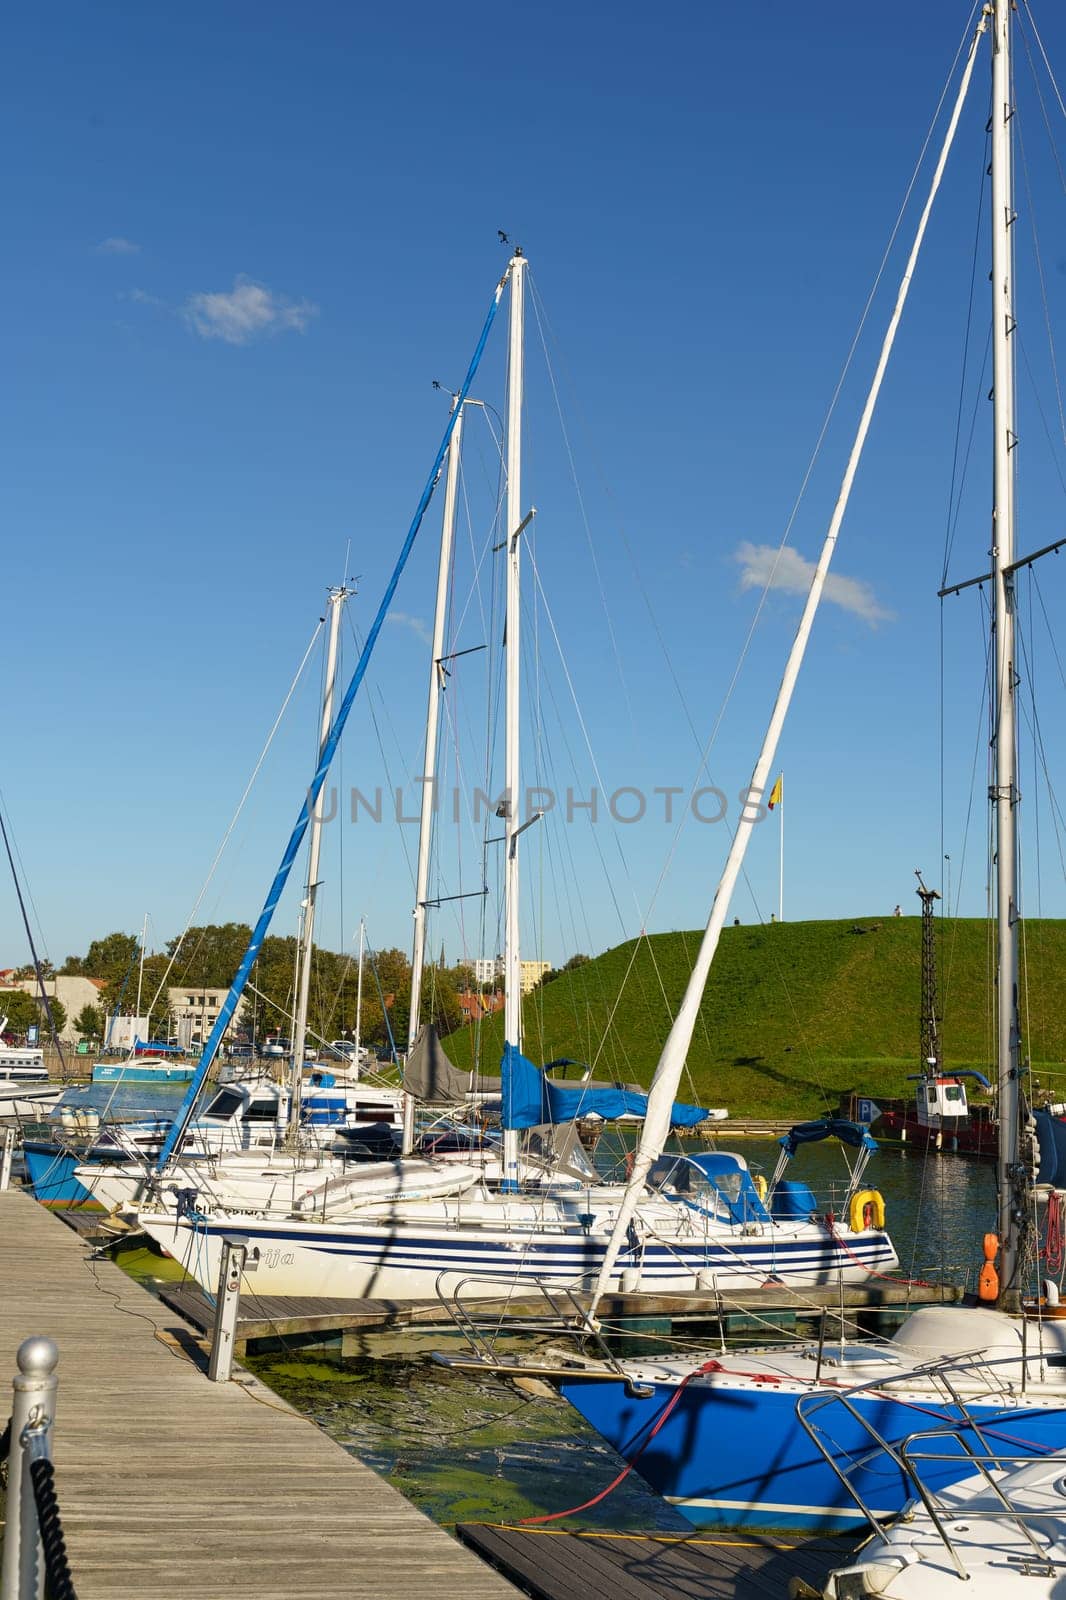 Klaipeda, Lithuania - August 11, 2023: A group of sailboats are secured to a pier, their masts reaching towards the sky as they rest on calm waters.